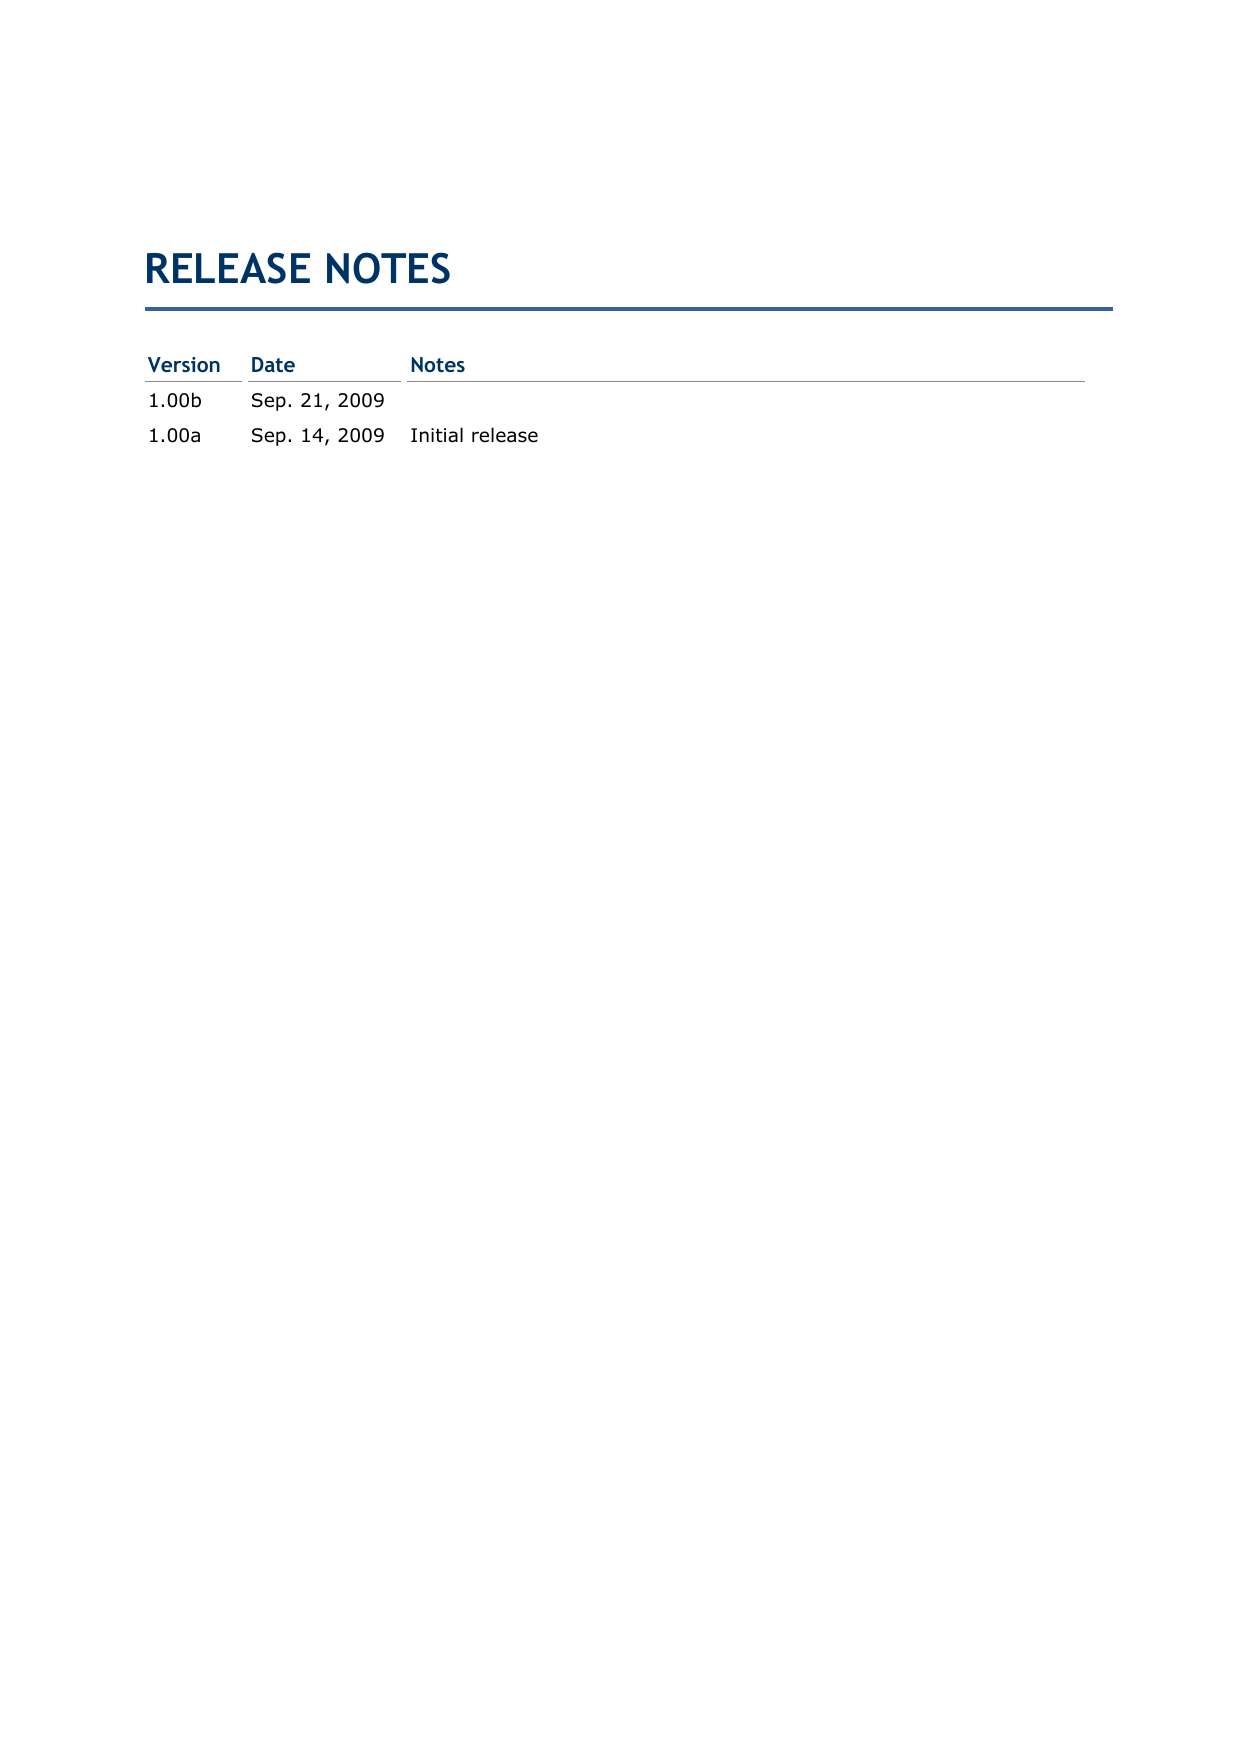  Version  Date  Notes 1.00b  Sep. 21, 2009   1.00a  Sep. 14, 2009  Initial release  RELEASE NOTES 